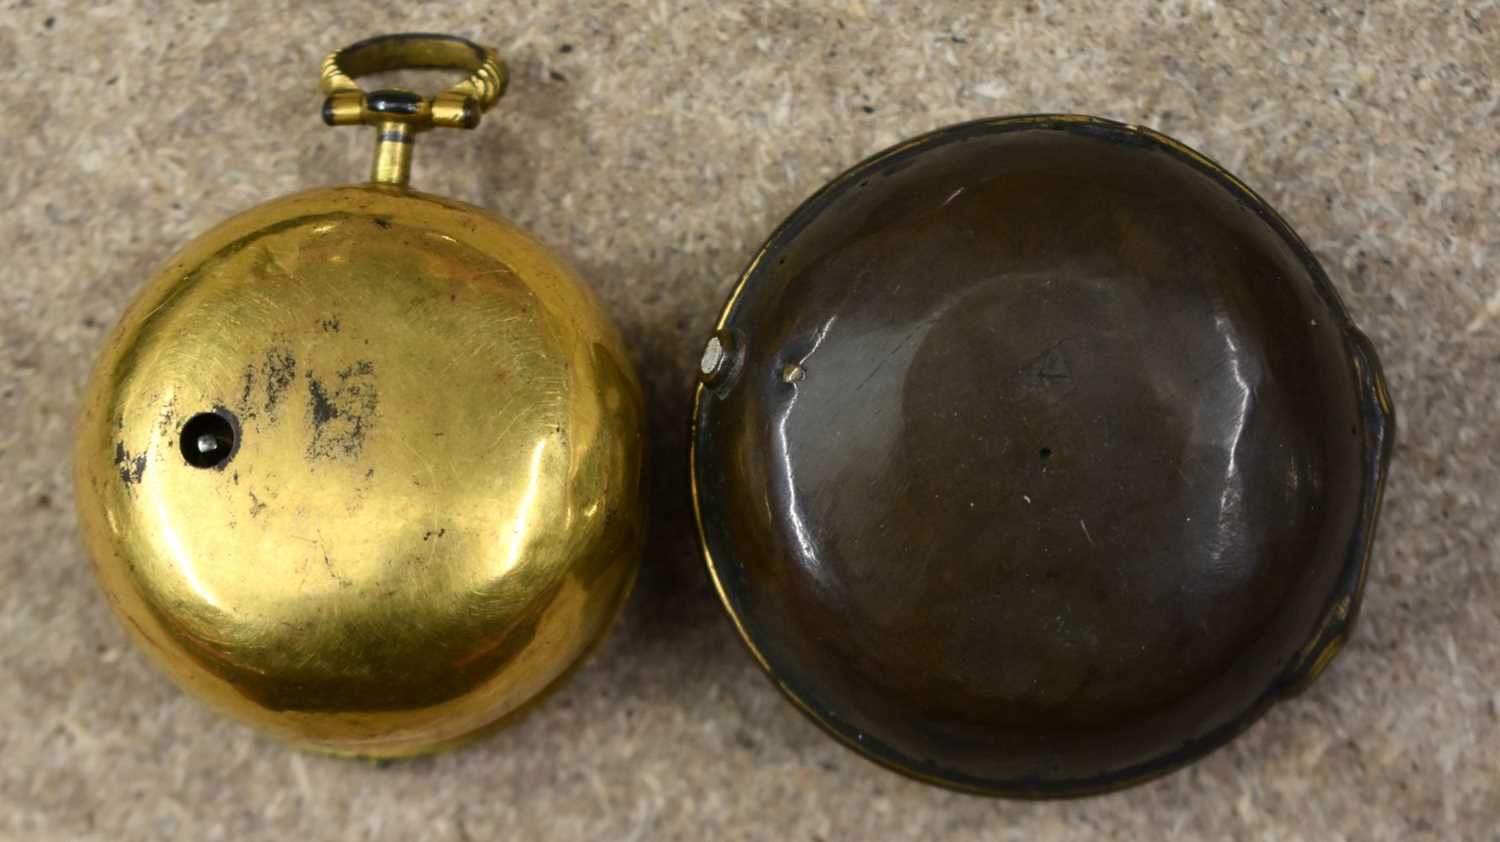 Gents pair case, verge/fusee, key wound and set, open face pocket watch, made by C. Charleson, - Image 3 of 7